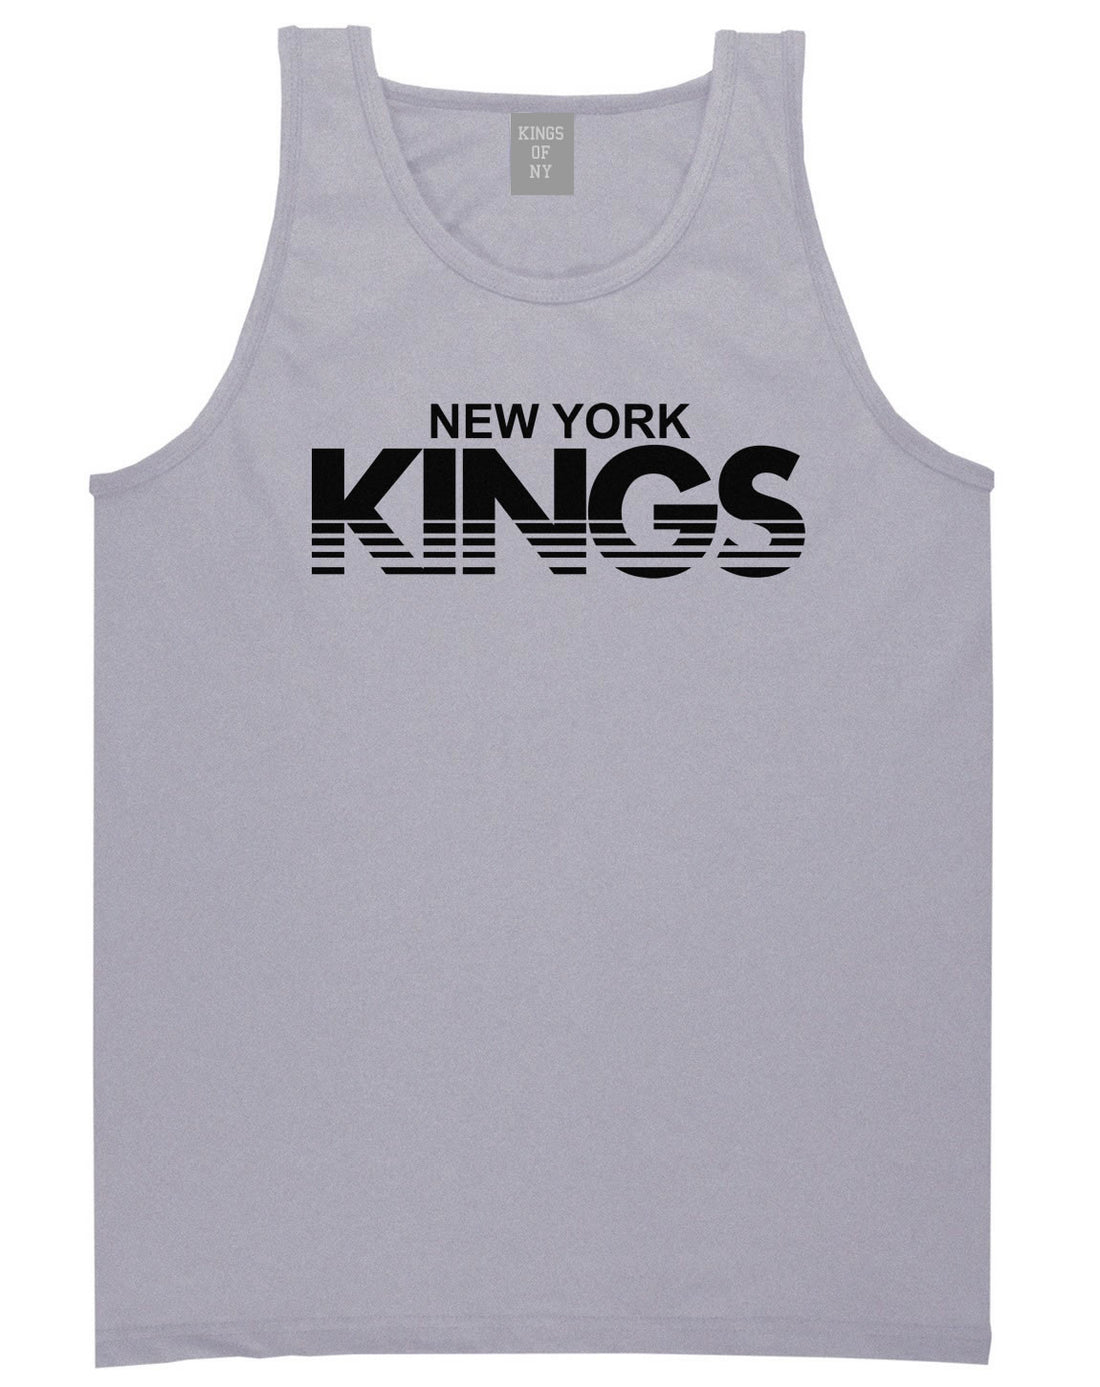 New York Kings Racing Style Tank Top in Grey by Kings Of NY